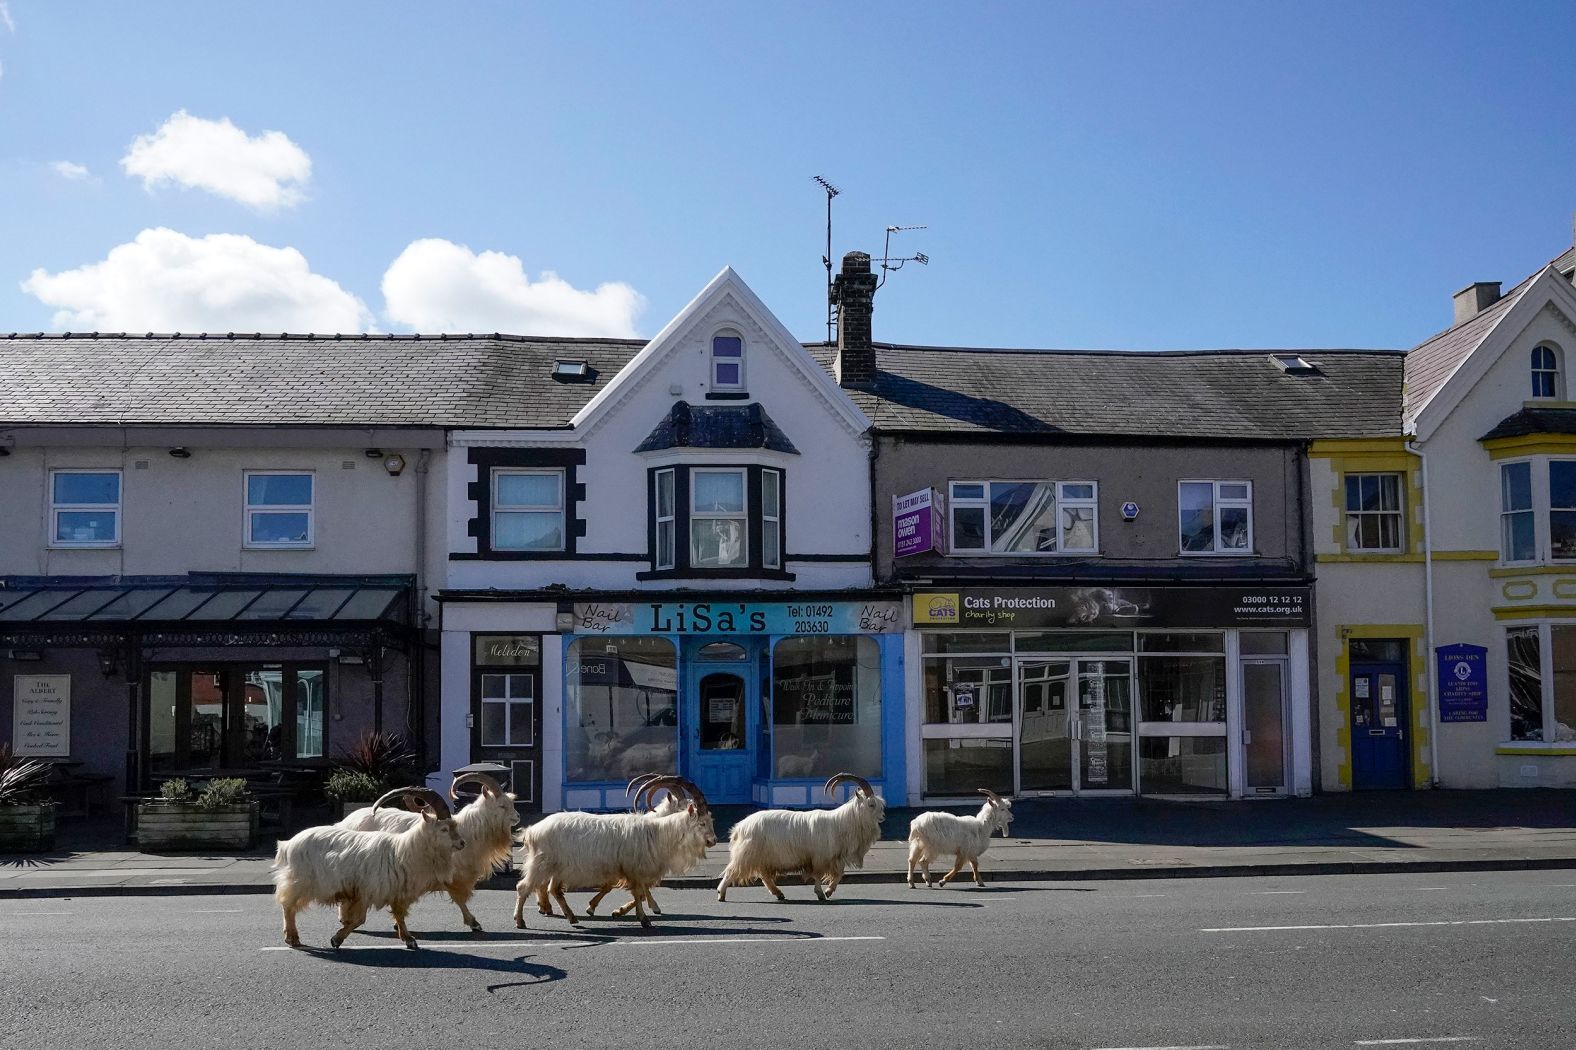 Mountain goats <a href="https://www.cnn.com/2020/03/31/europe/wild-goats-wales-streets-lockdown-scli-gbr/index.html" target="_blank">roam the quiet streets</a> of Llandudno, Wales, on March 31. "They sometimes come to the foot of the Great Orme in March, but this year they are all wandering the streets in town as there are no cars or people," said Mark Richards of the hotel Landsdowne House.